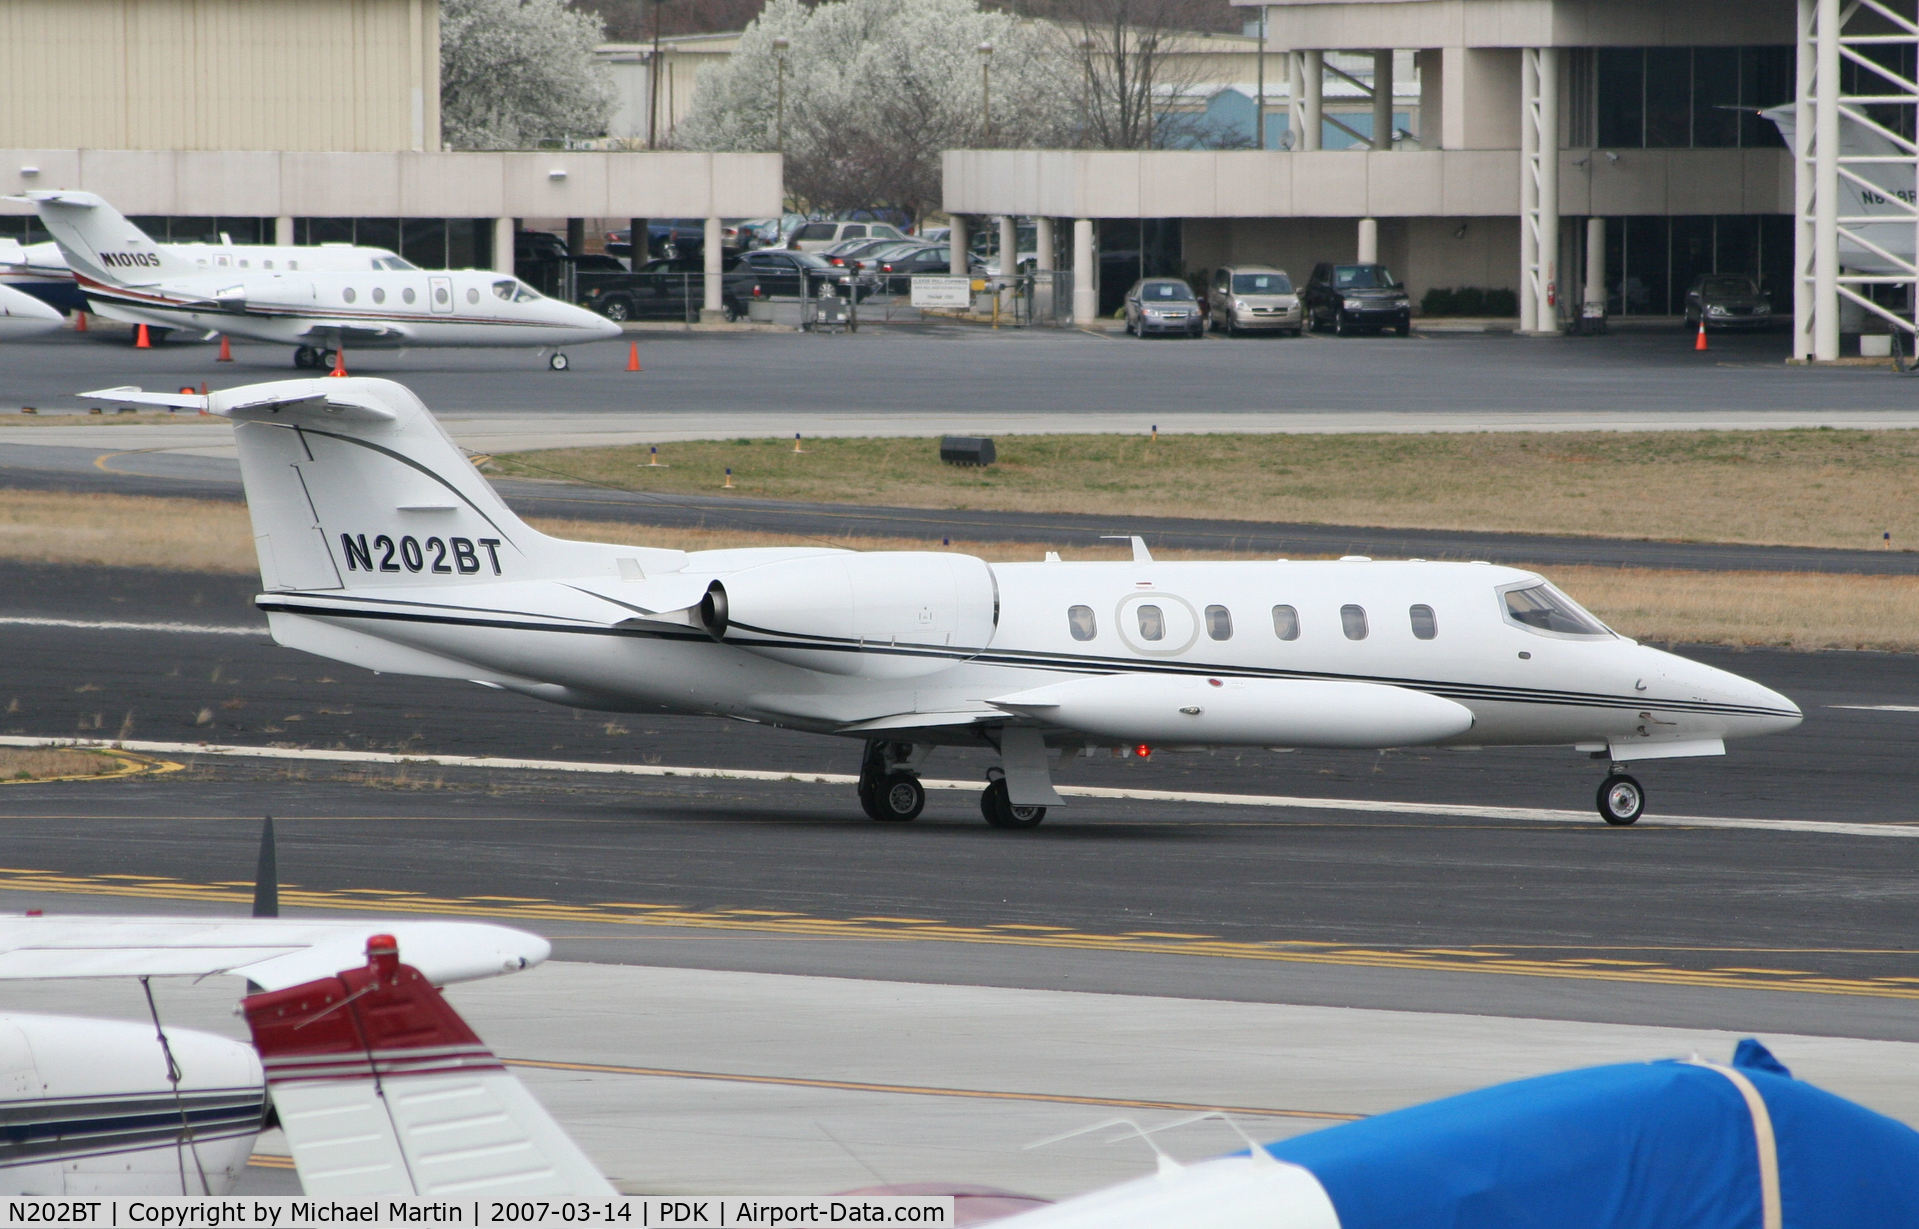 N202BT, 1982 Gates Learjet 35A C/N 483, Taxing to Runway 20L